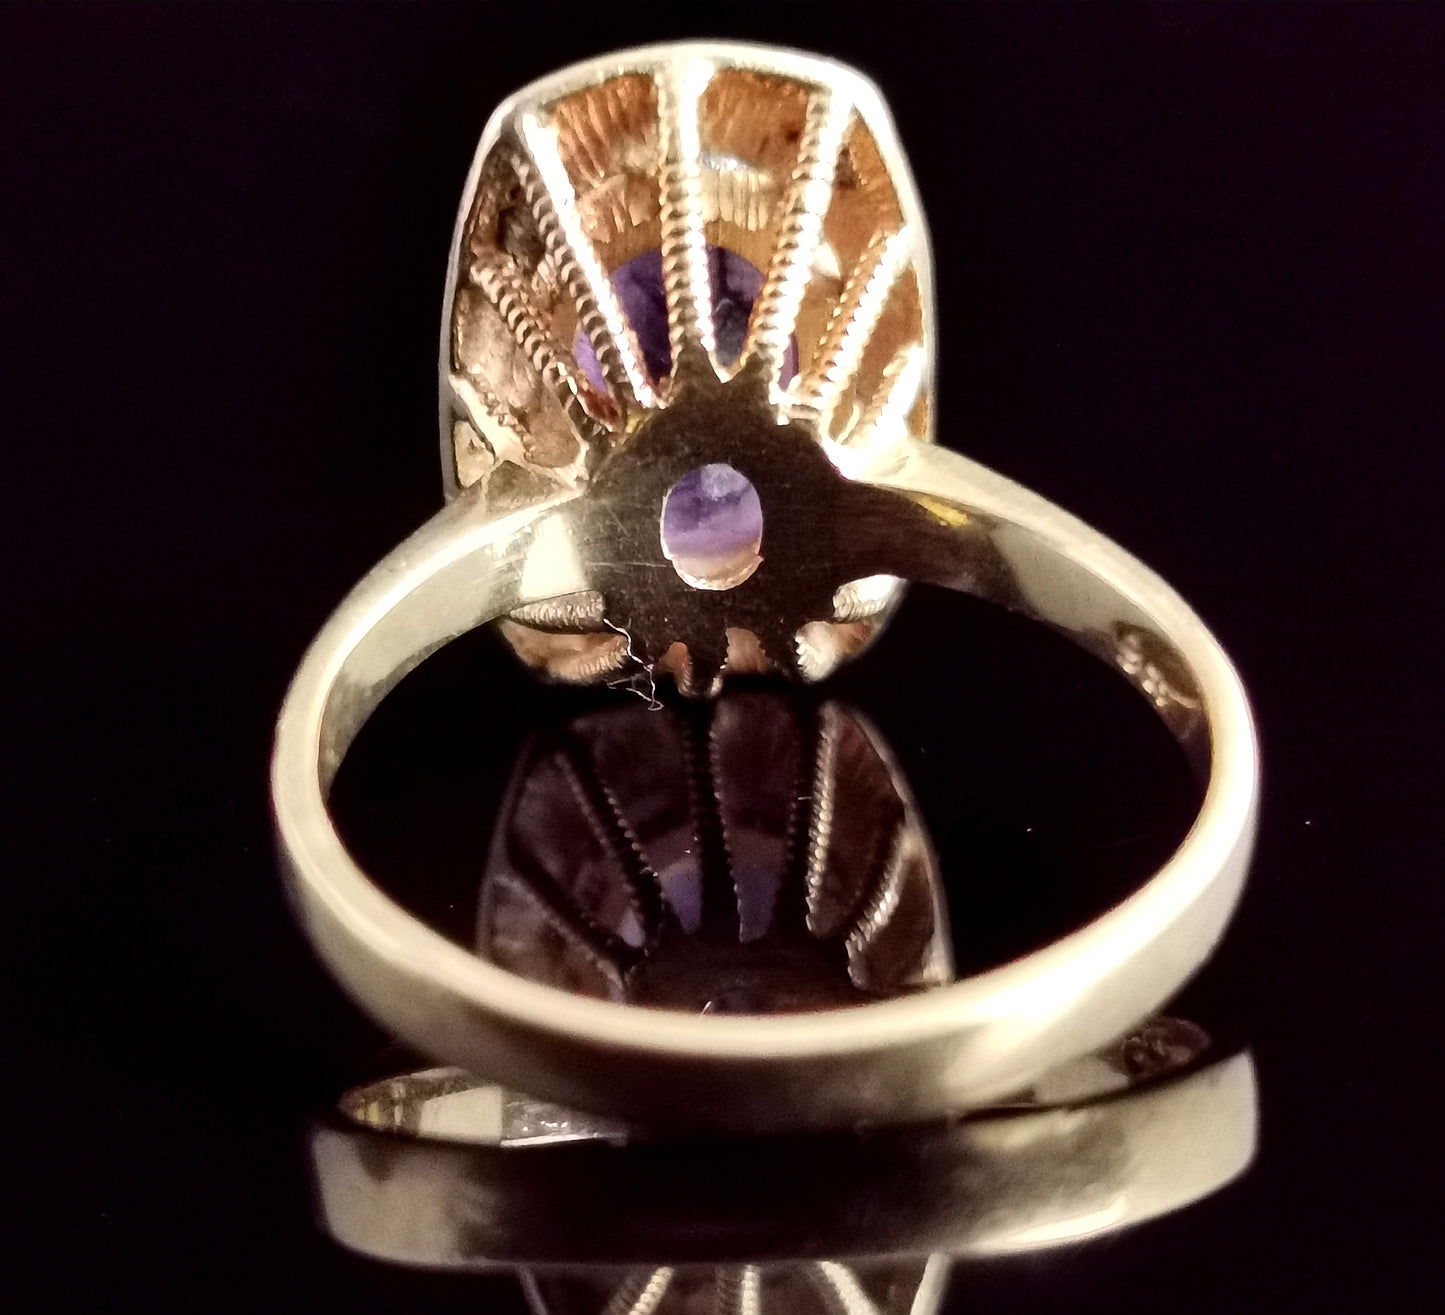 Vintage Amethyst cocktail ring, 9ct gold, 1970s